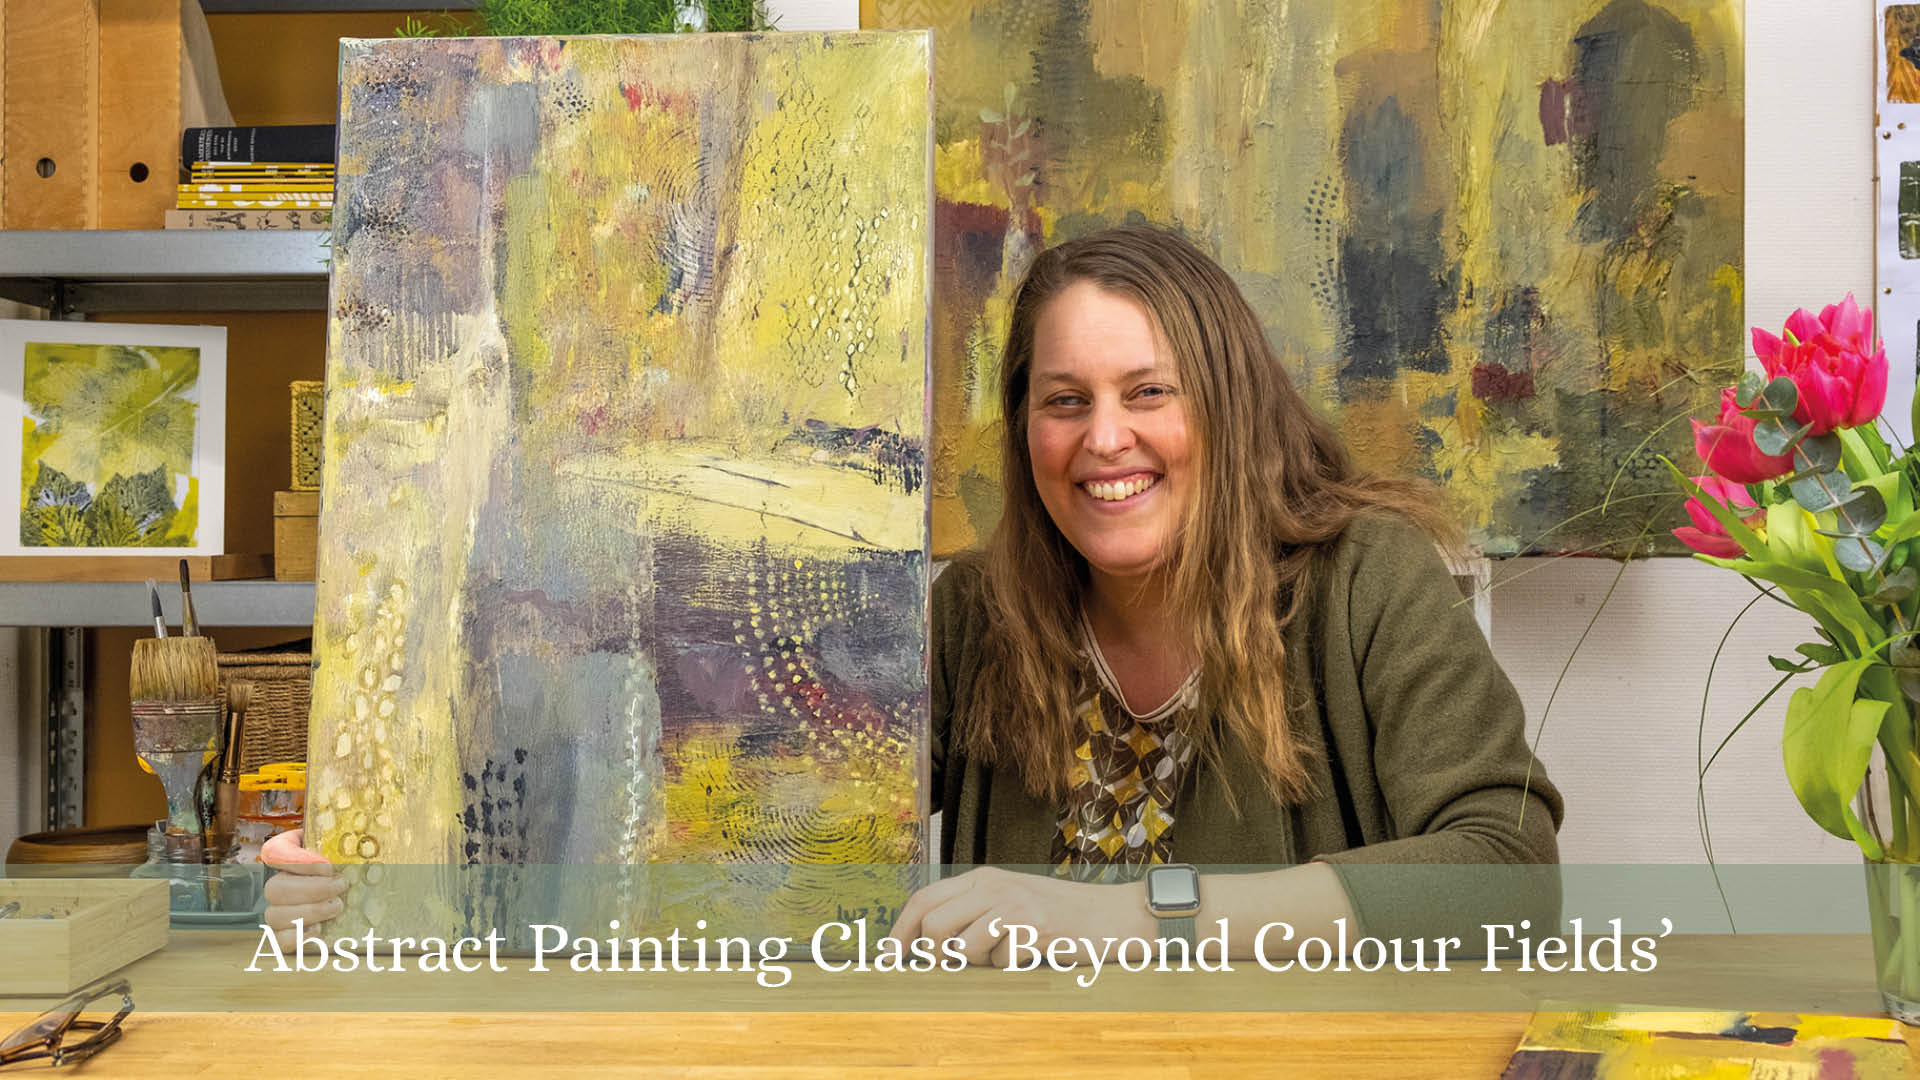 Abstract painting class Beyond Colour Fields - Brave Art Academy